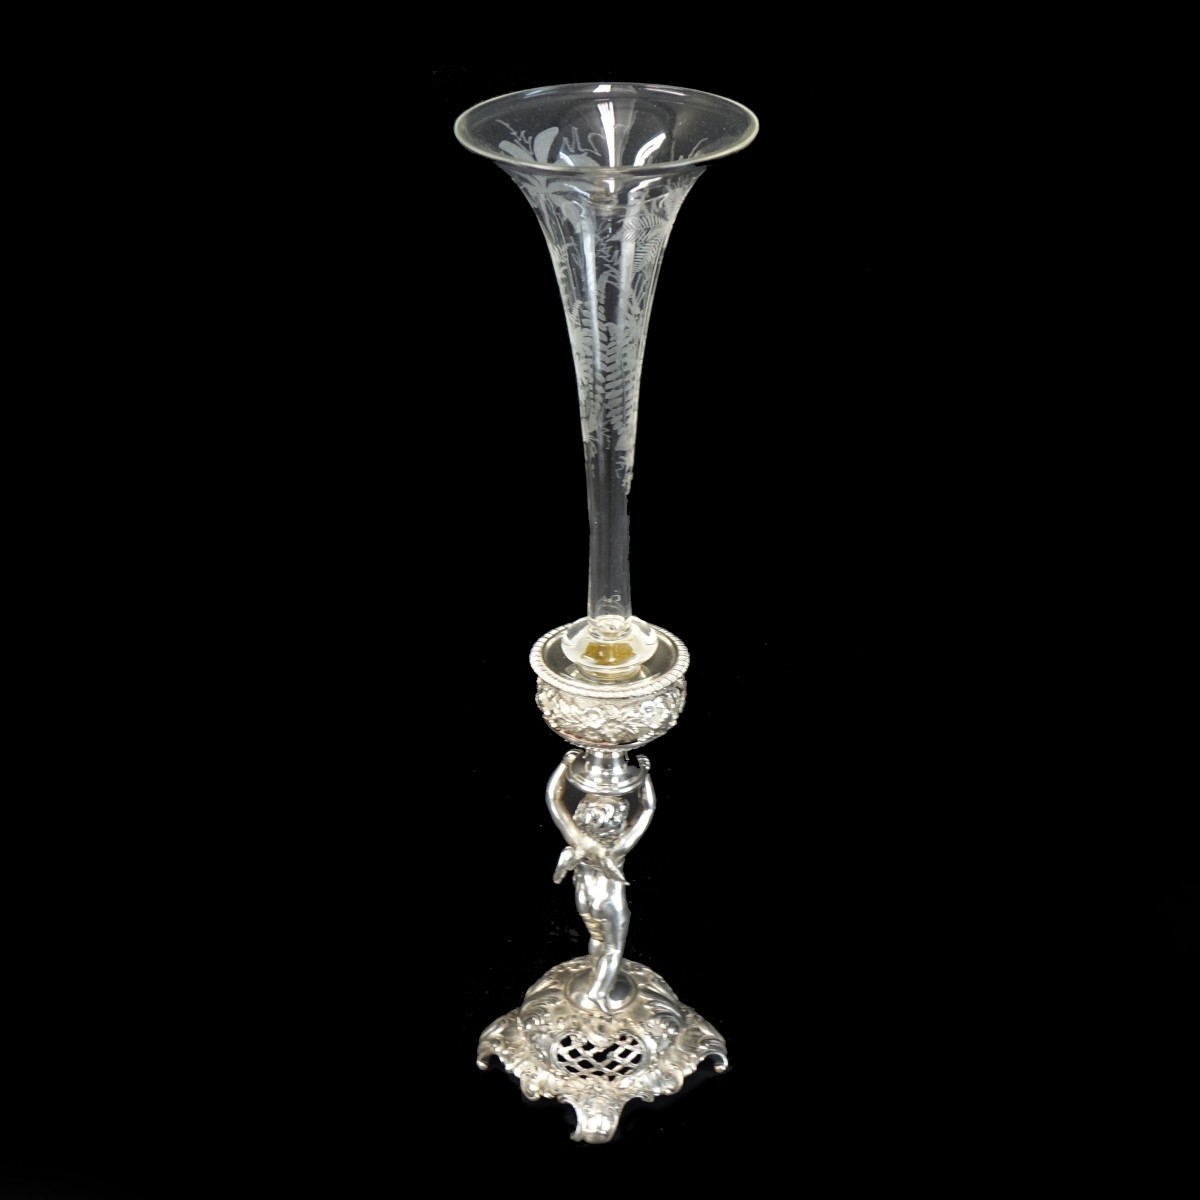 Silverplate and Etched Glass Epergne Vase